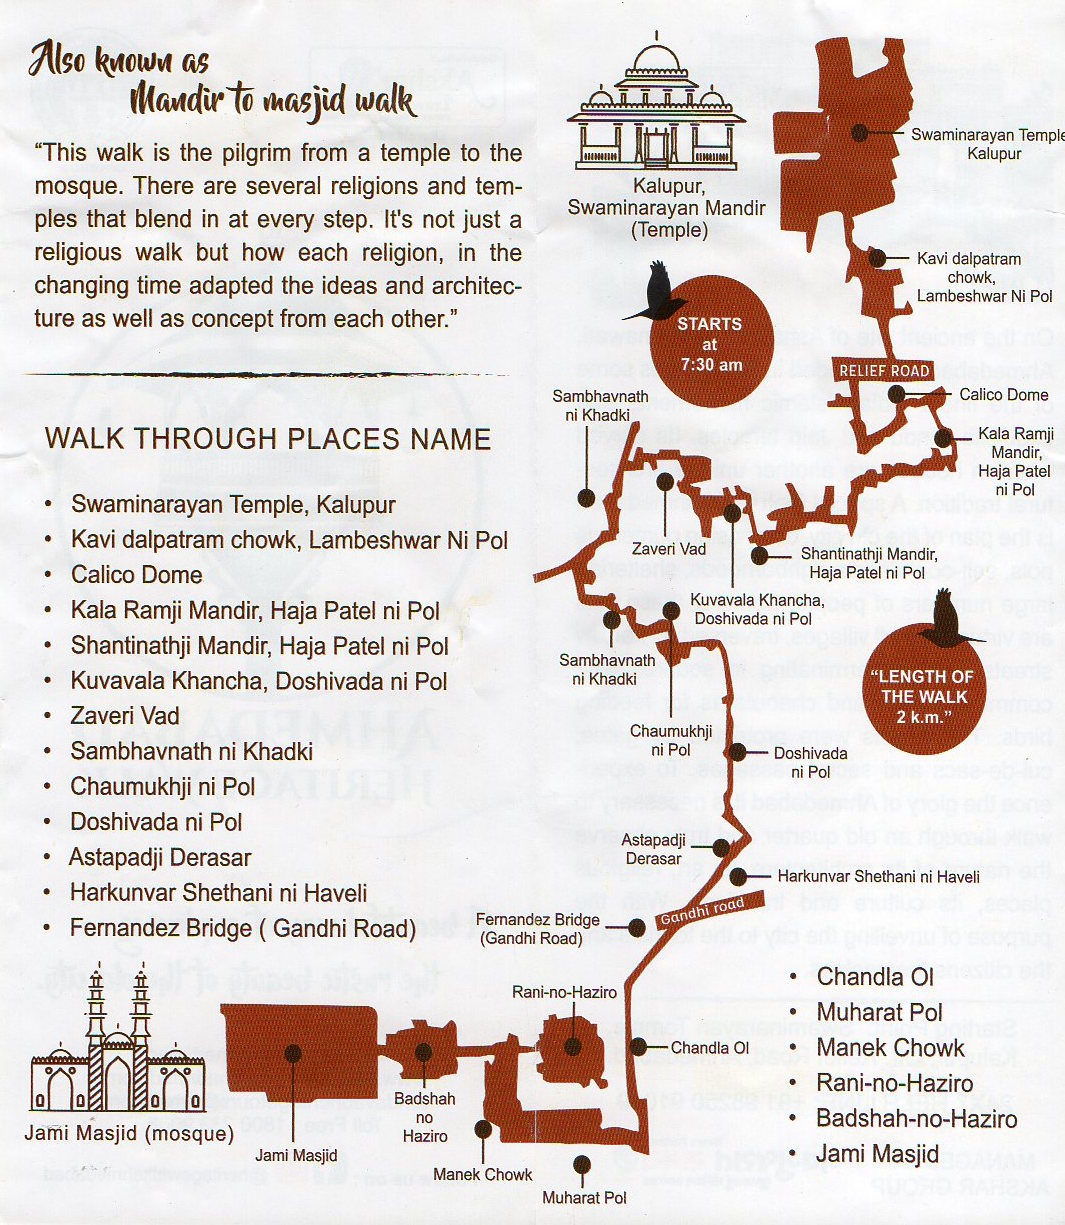 Route map of the Ahmedabad heritage walk